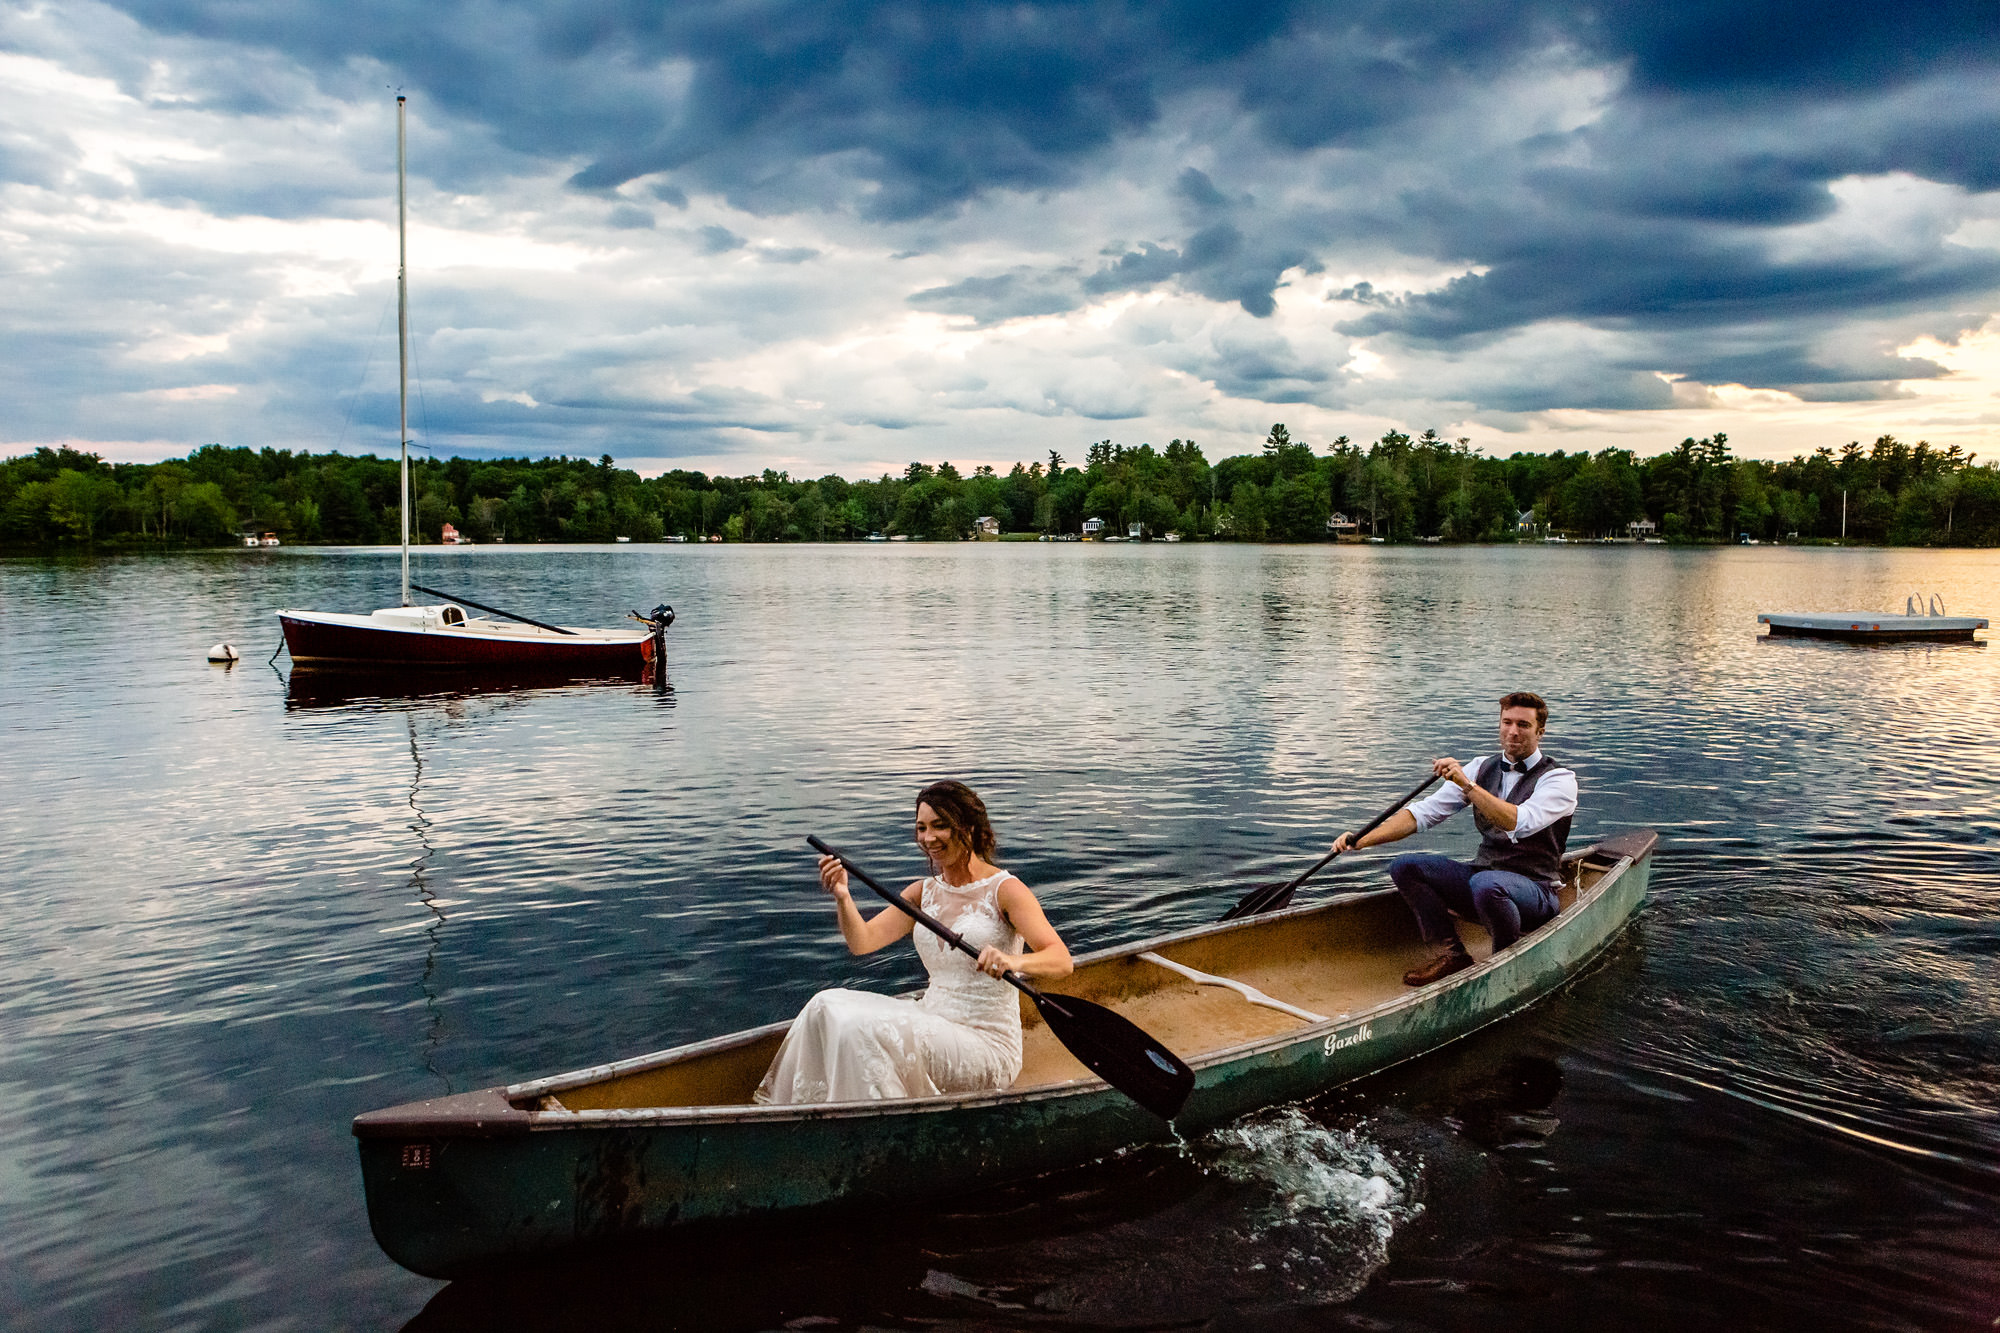 A bride and groom canoe at sunset on Cobbosseecontee lake